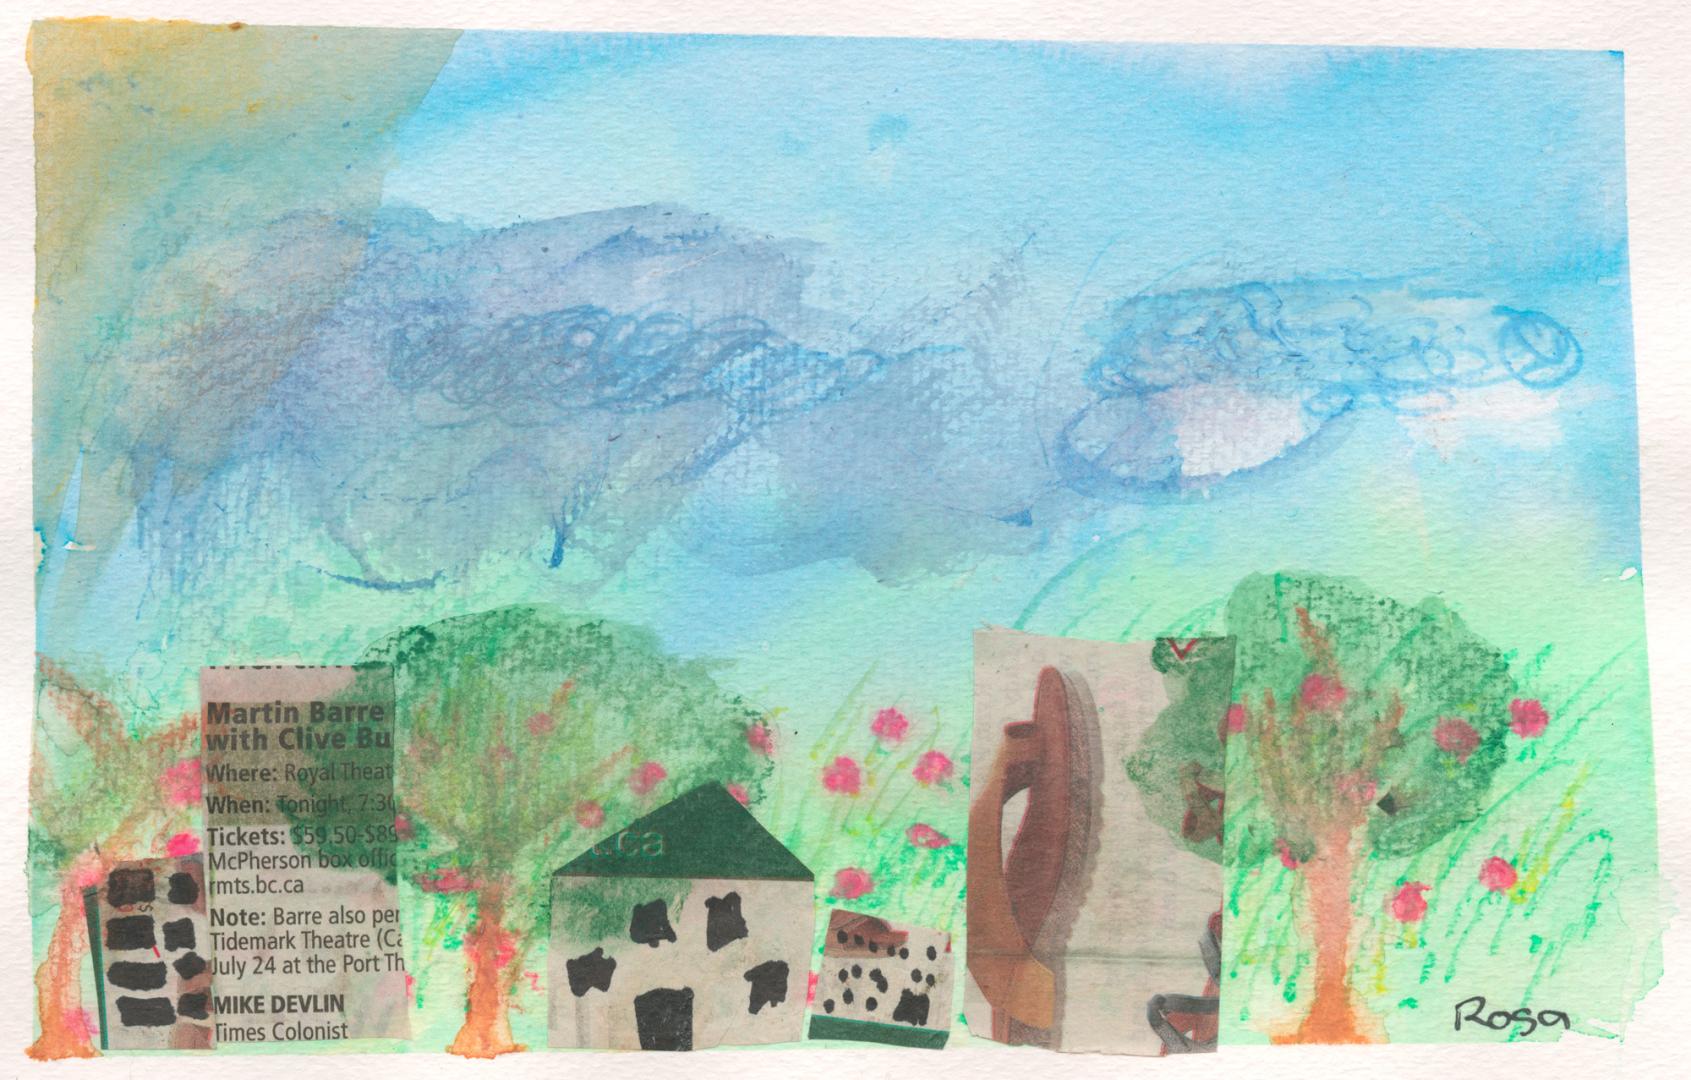 A child's drawing of trees in a green field.